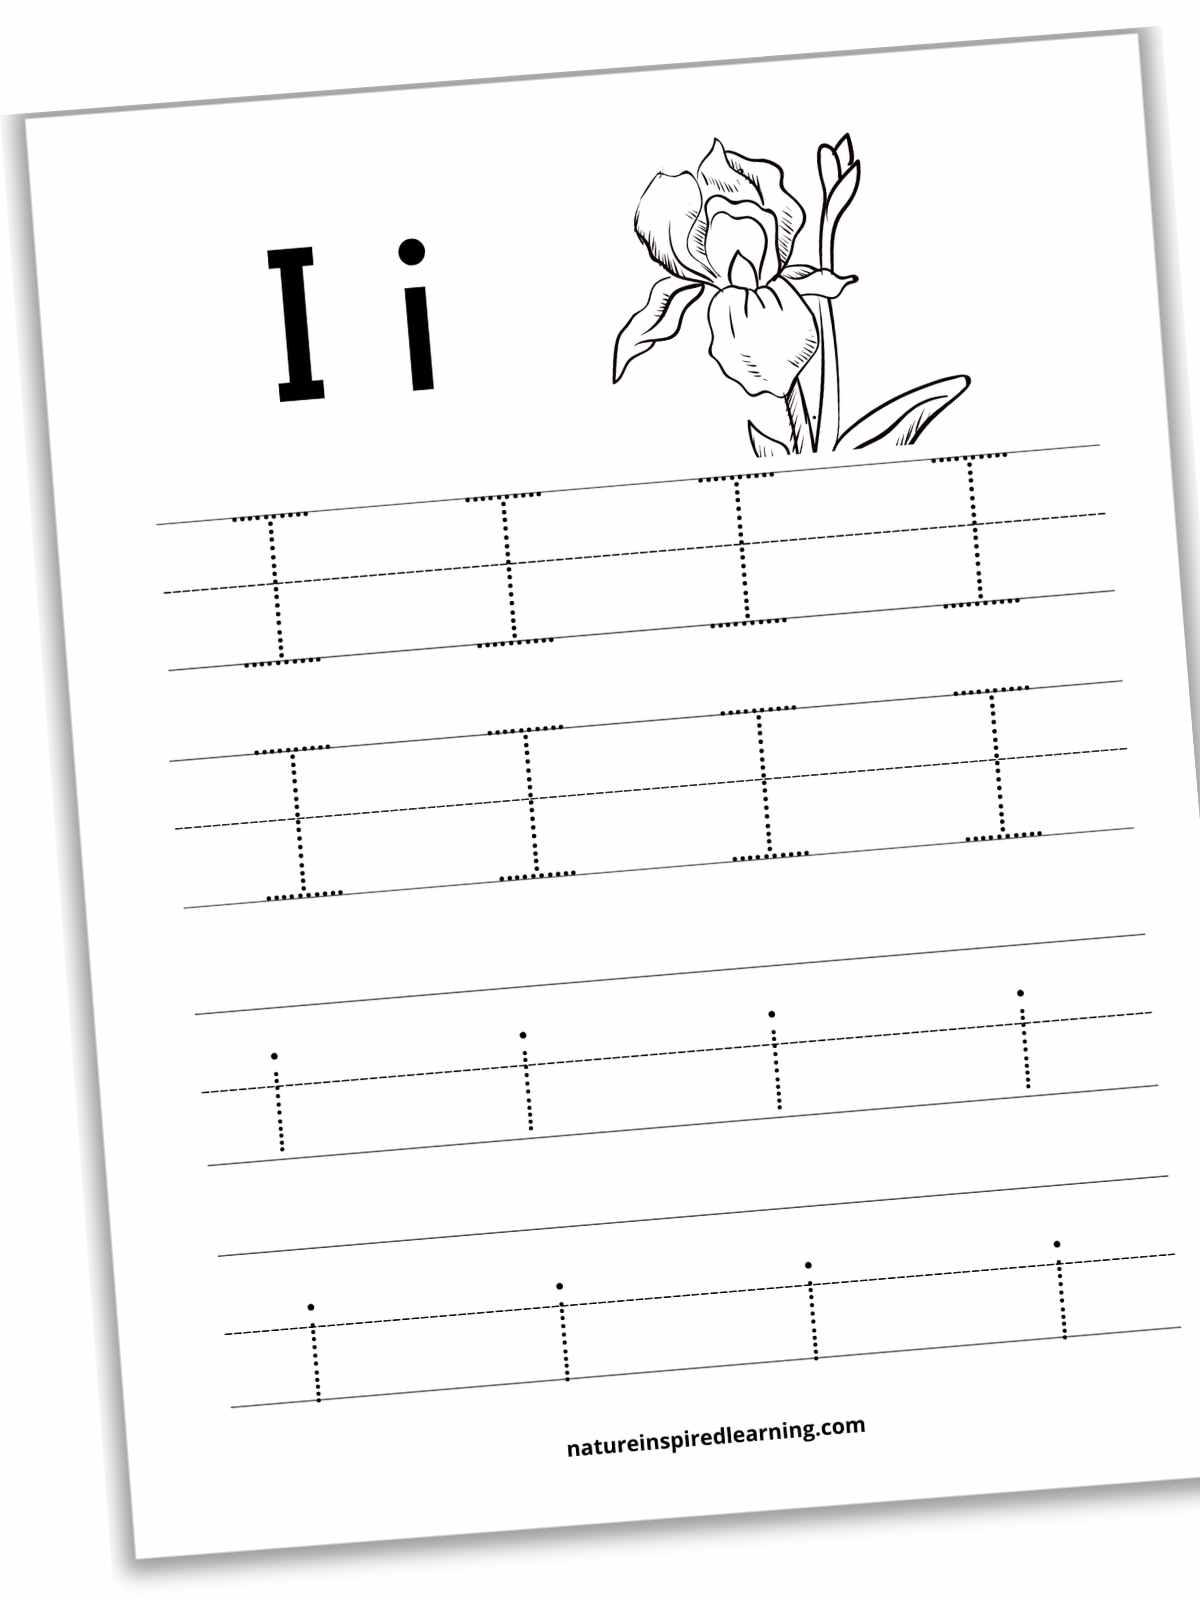 worksheet with I and i in bold at the top with a black and white iris. Four set of lines, two sets with four dotted I's on each and two sets with four dotted i's on each.